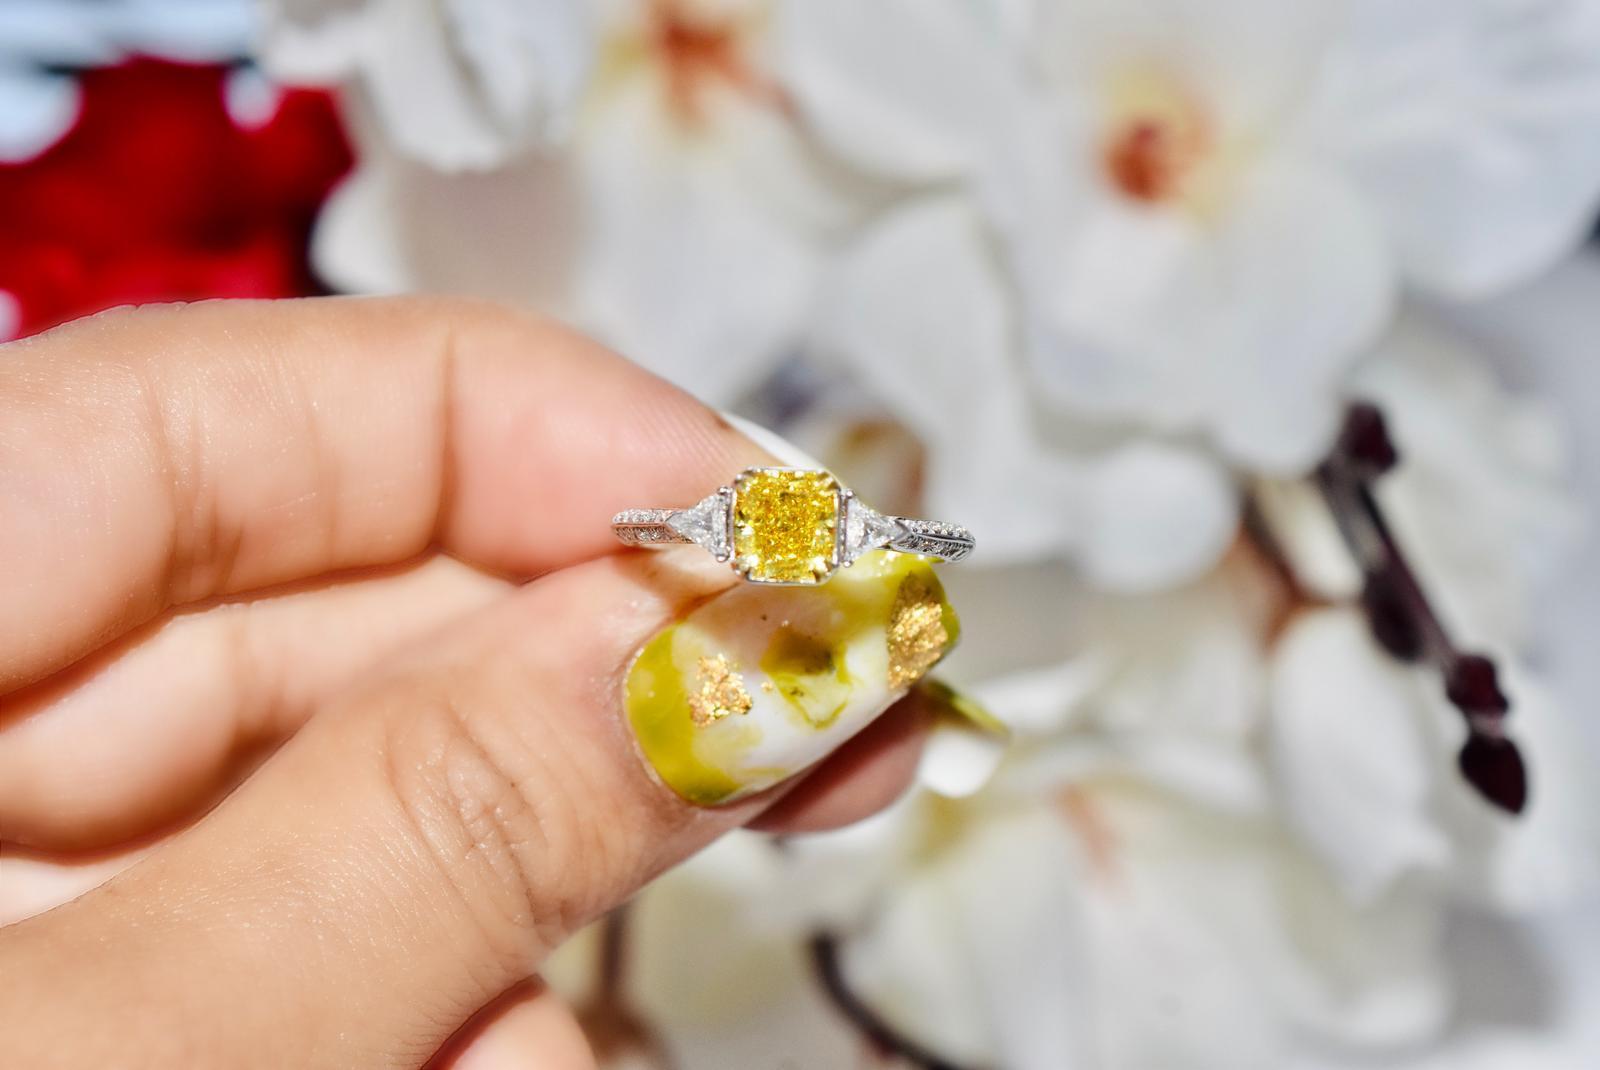 **100% NATURAL FANCY COLOUR DIAMOND JEWELRY**

✪ Jewelry Details ✪

♦ MAIN STONE DETAILS

➛ Stone Shape: Radiant
➛ Stone Color: Fancy Deep Yellow
➛ Stone Clarity: VS2
➛ Stone Weight: 1.01 carats
➛ GIA certified

♦ SIDE STONE DETAILS

➛ Side white